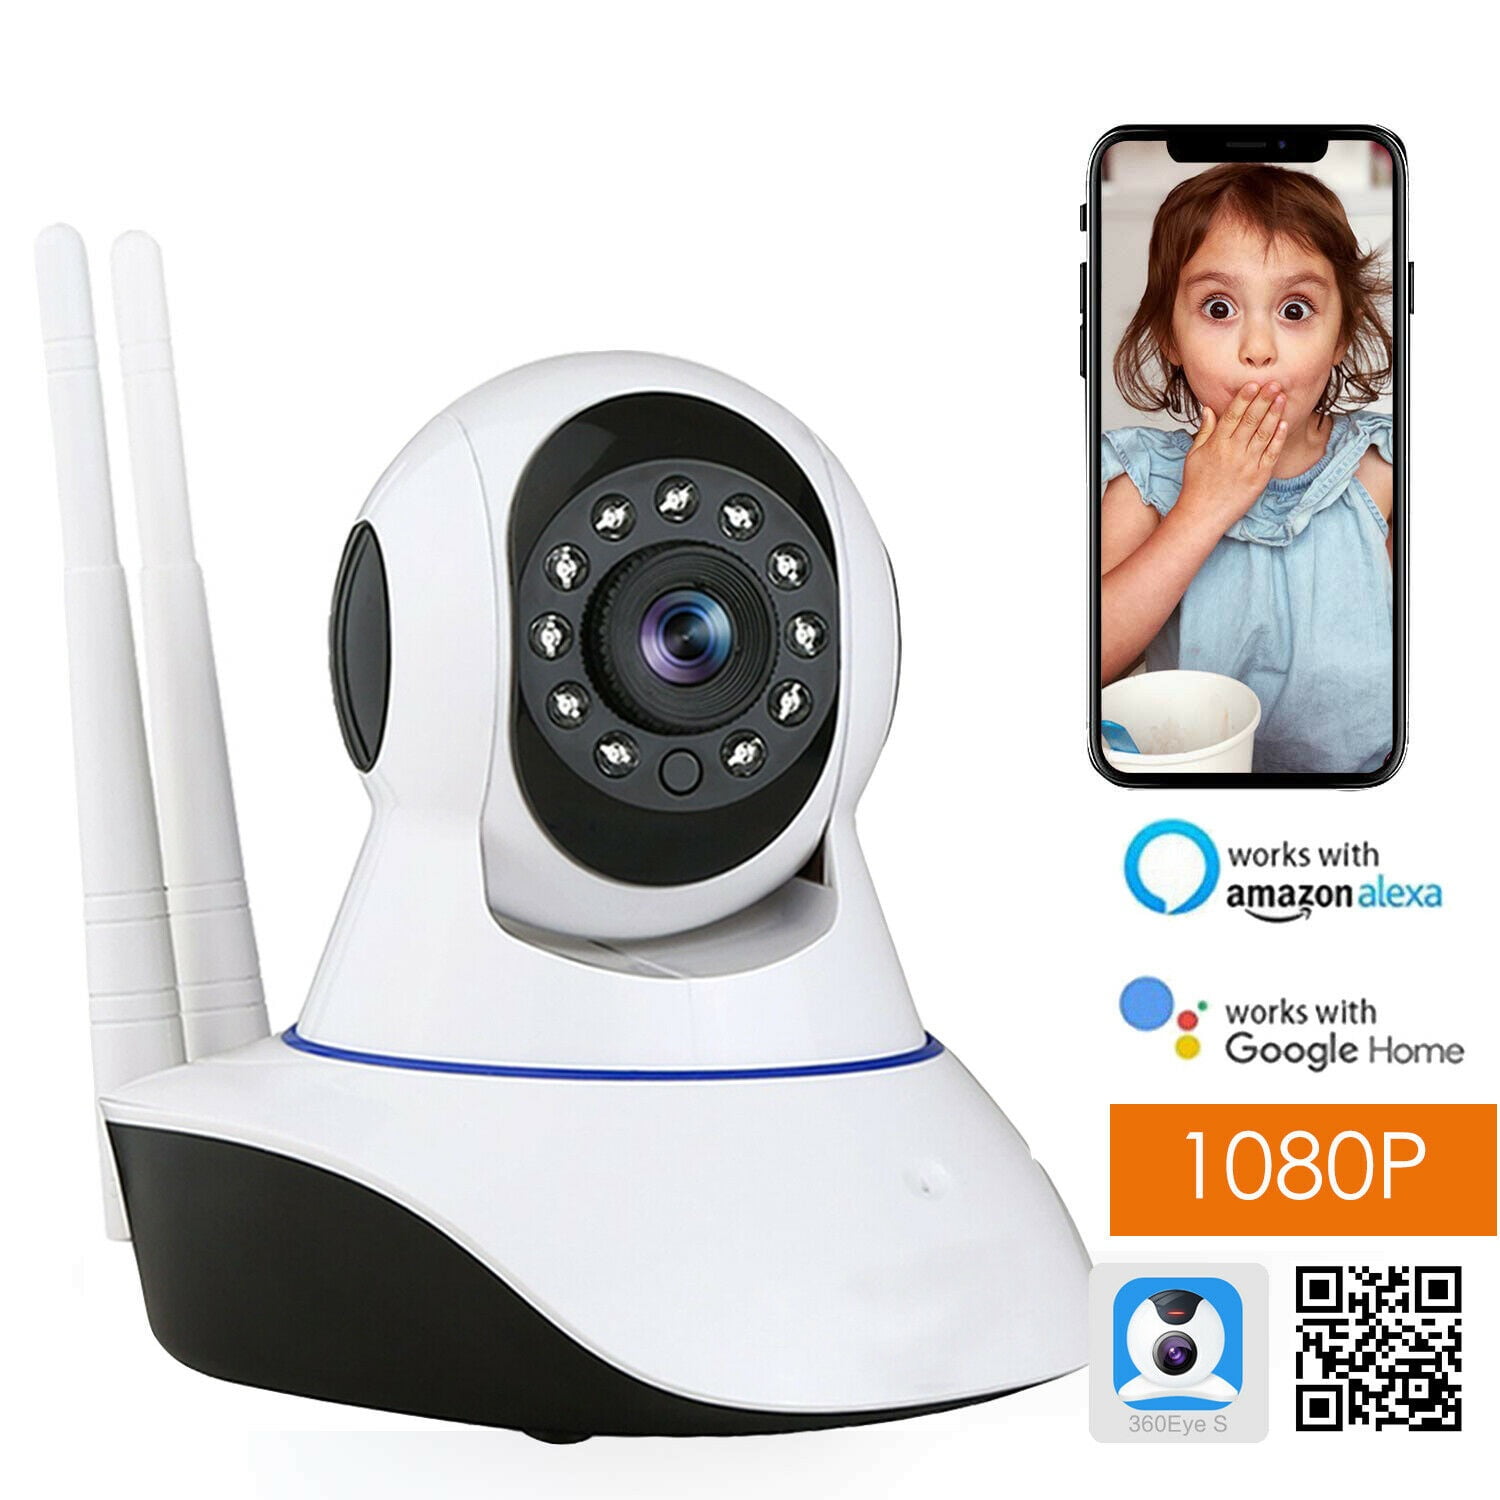 1080P HD Dome 360° Wireless WiFi Baby Monitor Safety Home Security  Surveillance IP Cloud Cam Night Vision Camera for Baby Pet Android iOS apps  - Walmart.com